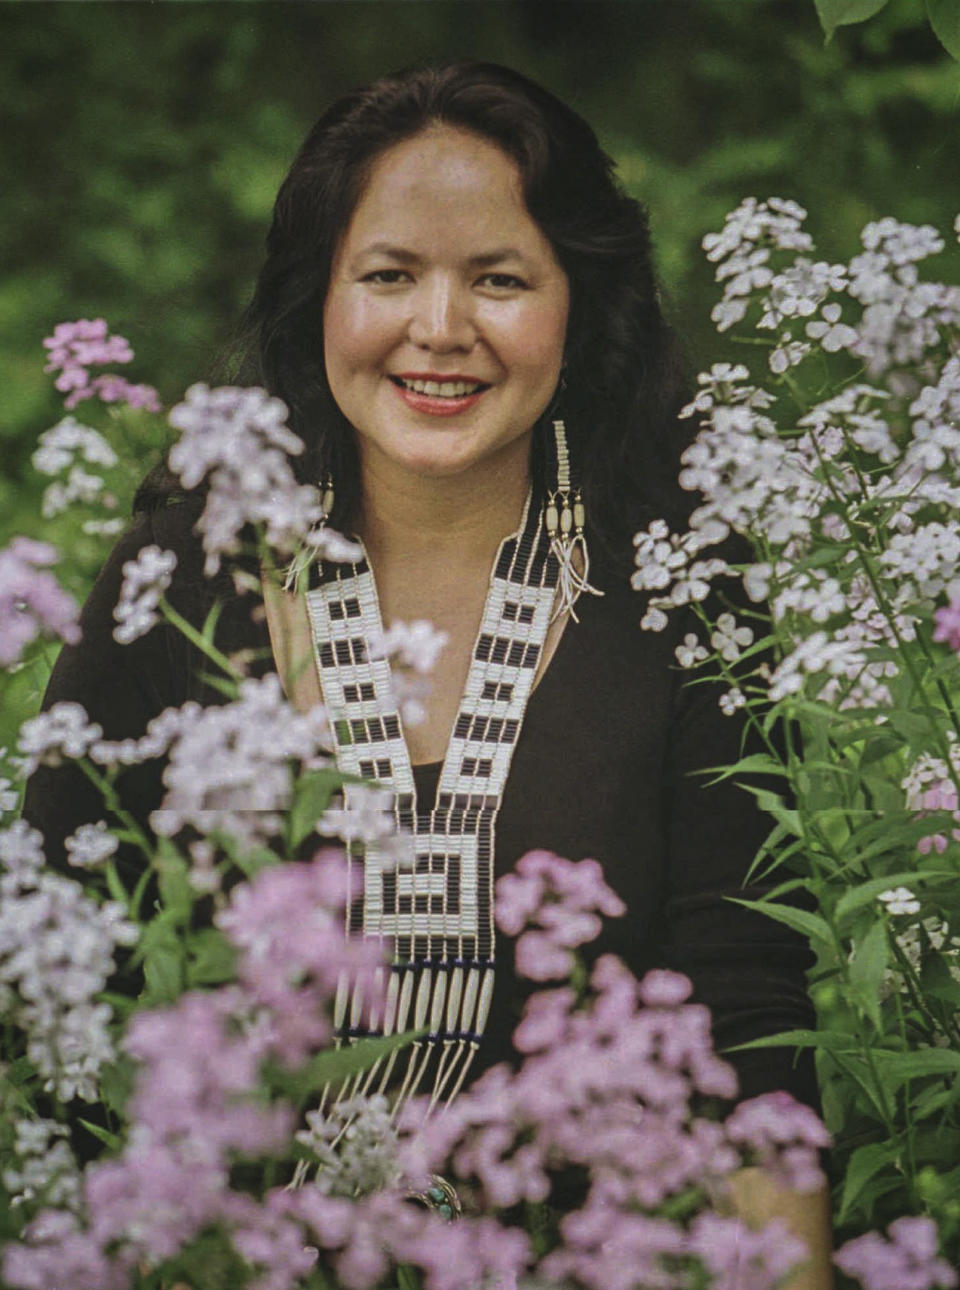 FILE - Native American singer Joanne Shenandoah poses at the ancient Oneida Indian village site known as Nichols Pond near Canastota, N.Y., on June 12, 1996. Shenandoah, the celebrated Native American singer-songwriter who performed before world leaders and on high-profile stages, has died. The Native American Music Awards & Association posted on its website that Shenandoah, described as “Native America's musical matriarch," died Monday night, Nov. 22, 2021, in Scottsdale, Ariz., after complications of abdominal bleeding. She was 63. (AP Photo/Michael Okoniewski, File)